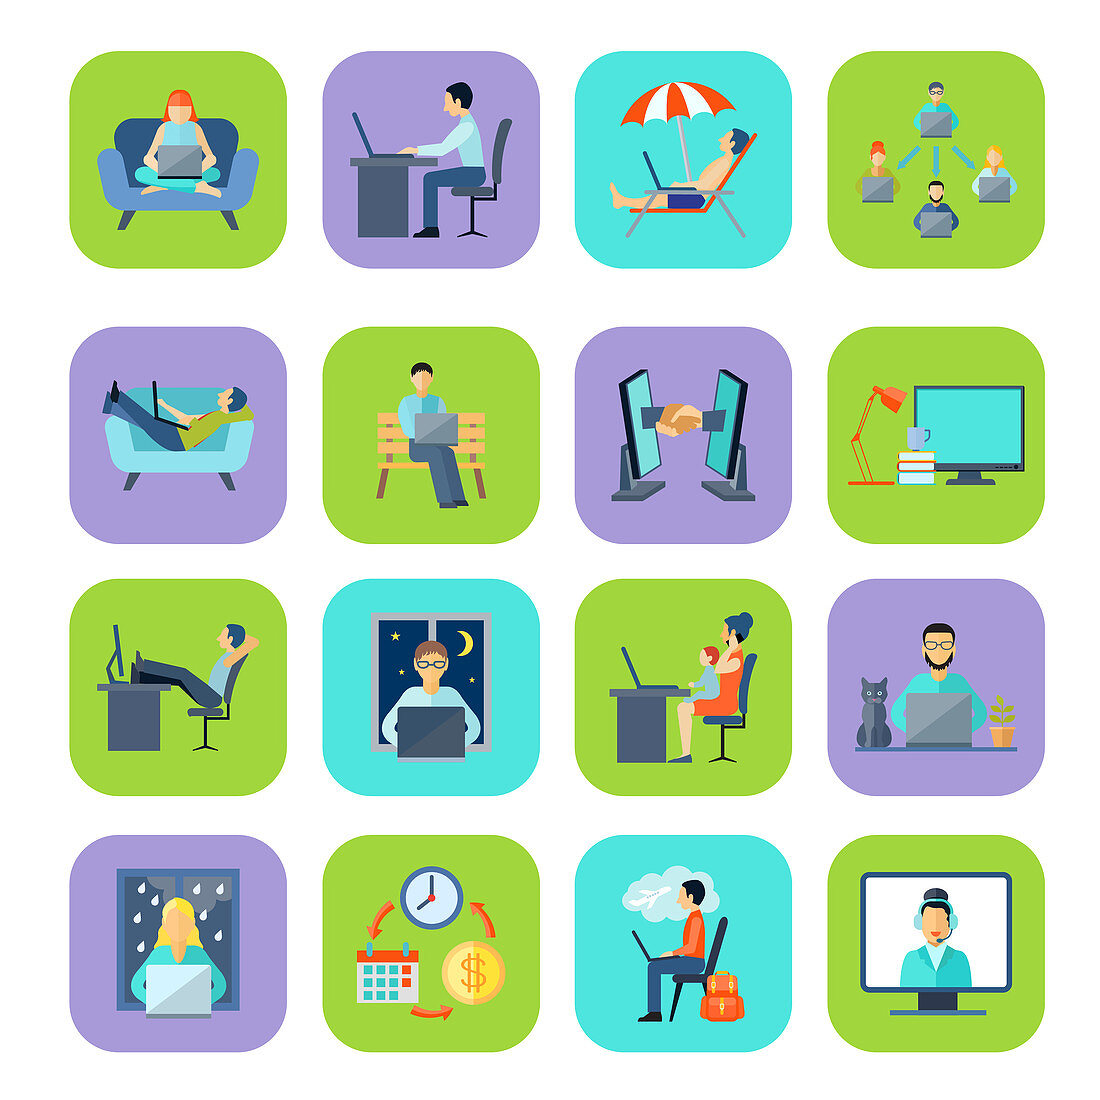 Remote working icons, illustration